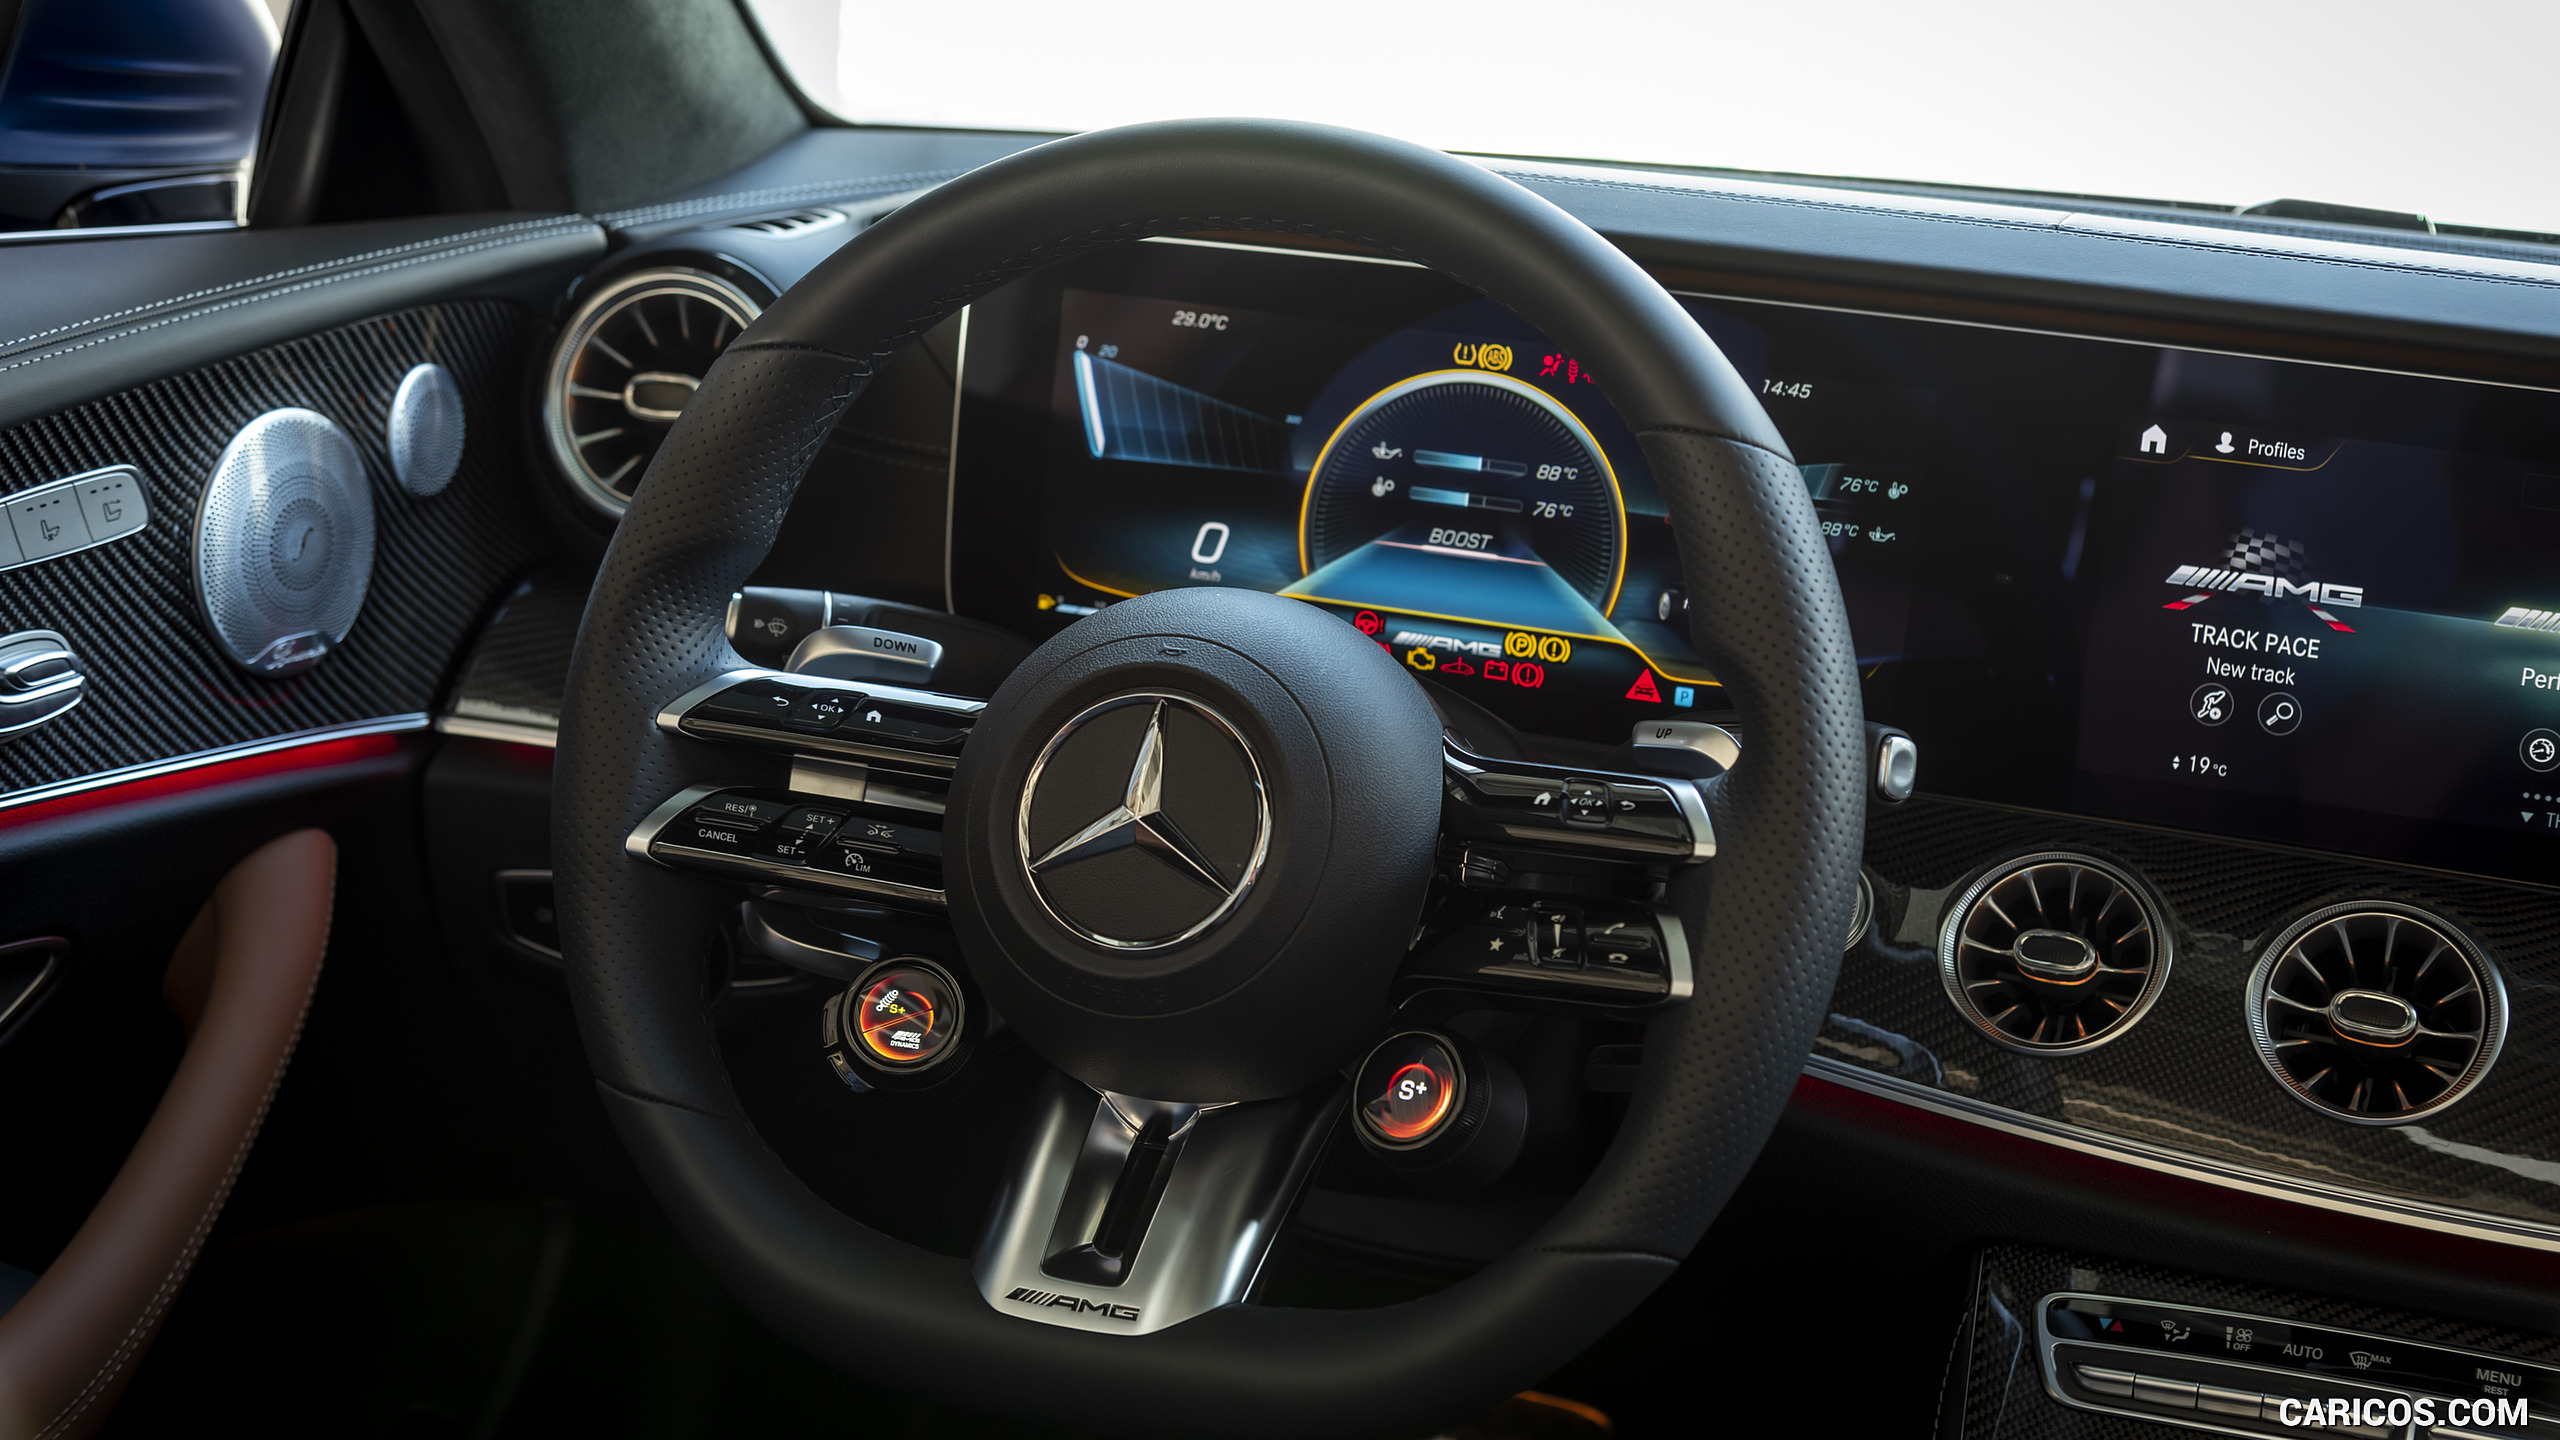 2021 Mercedes-AMG E 53 4MATIC+ Cabriolet - Interior, Steering Wheel, #74 of 166